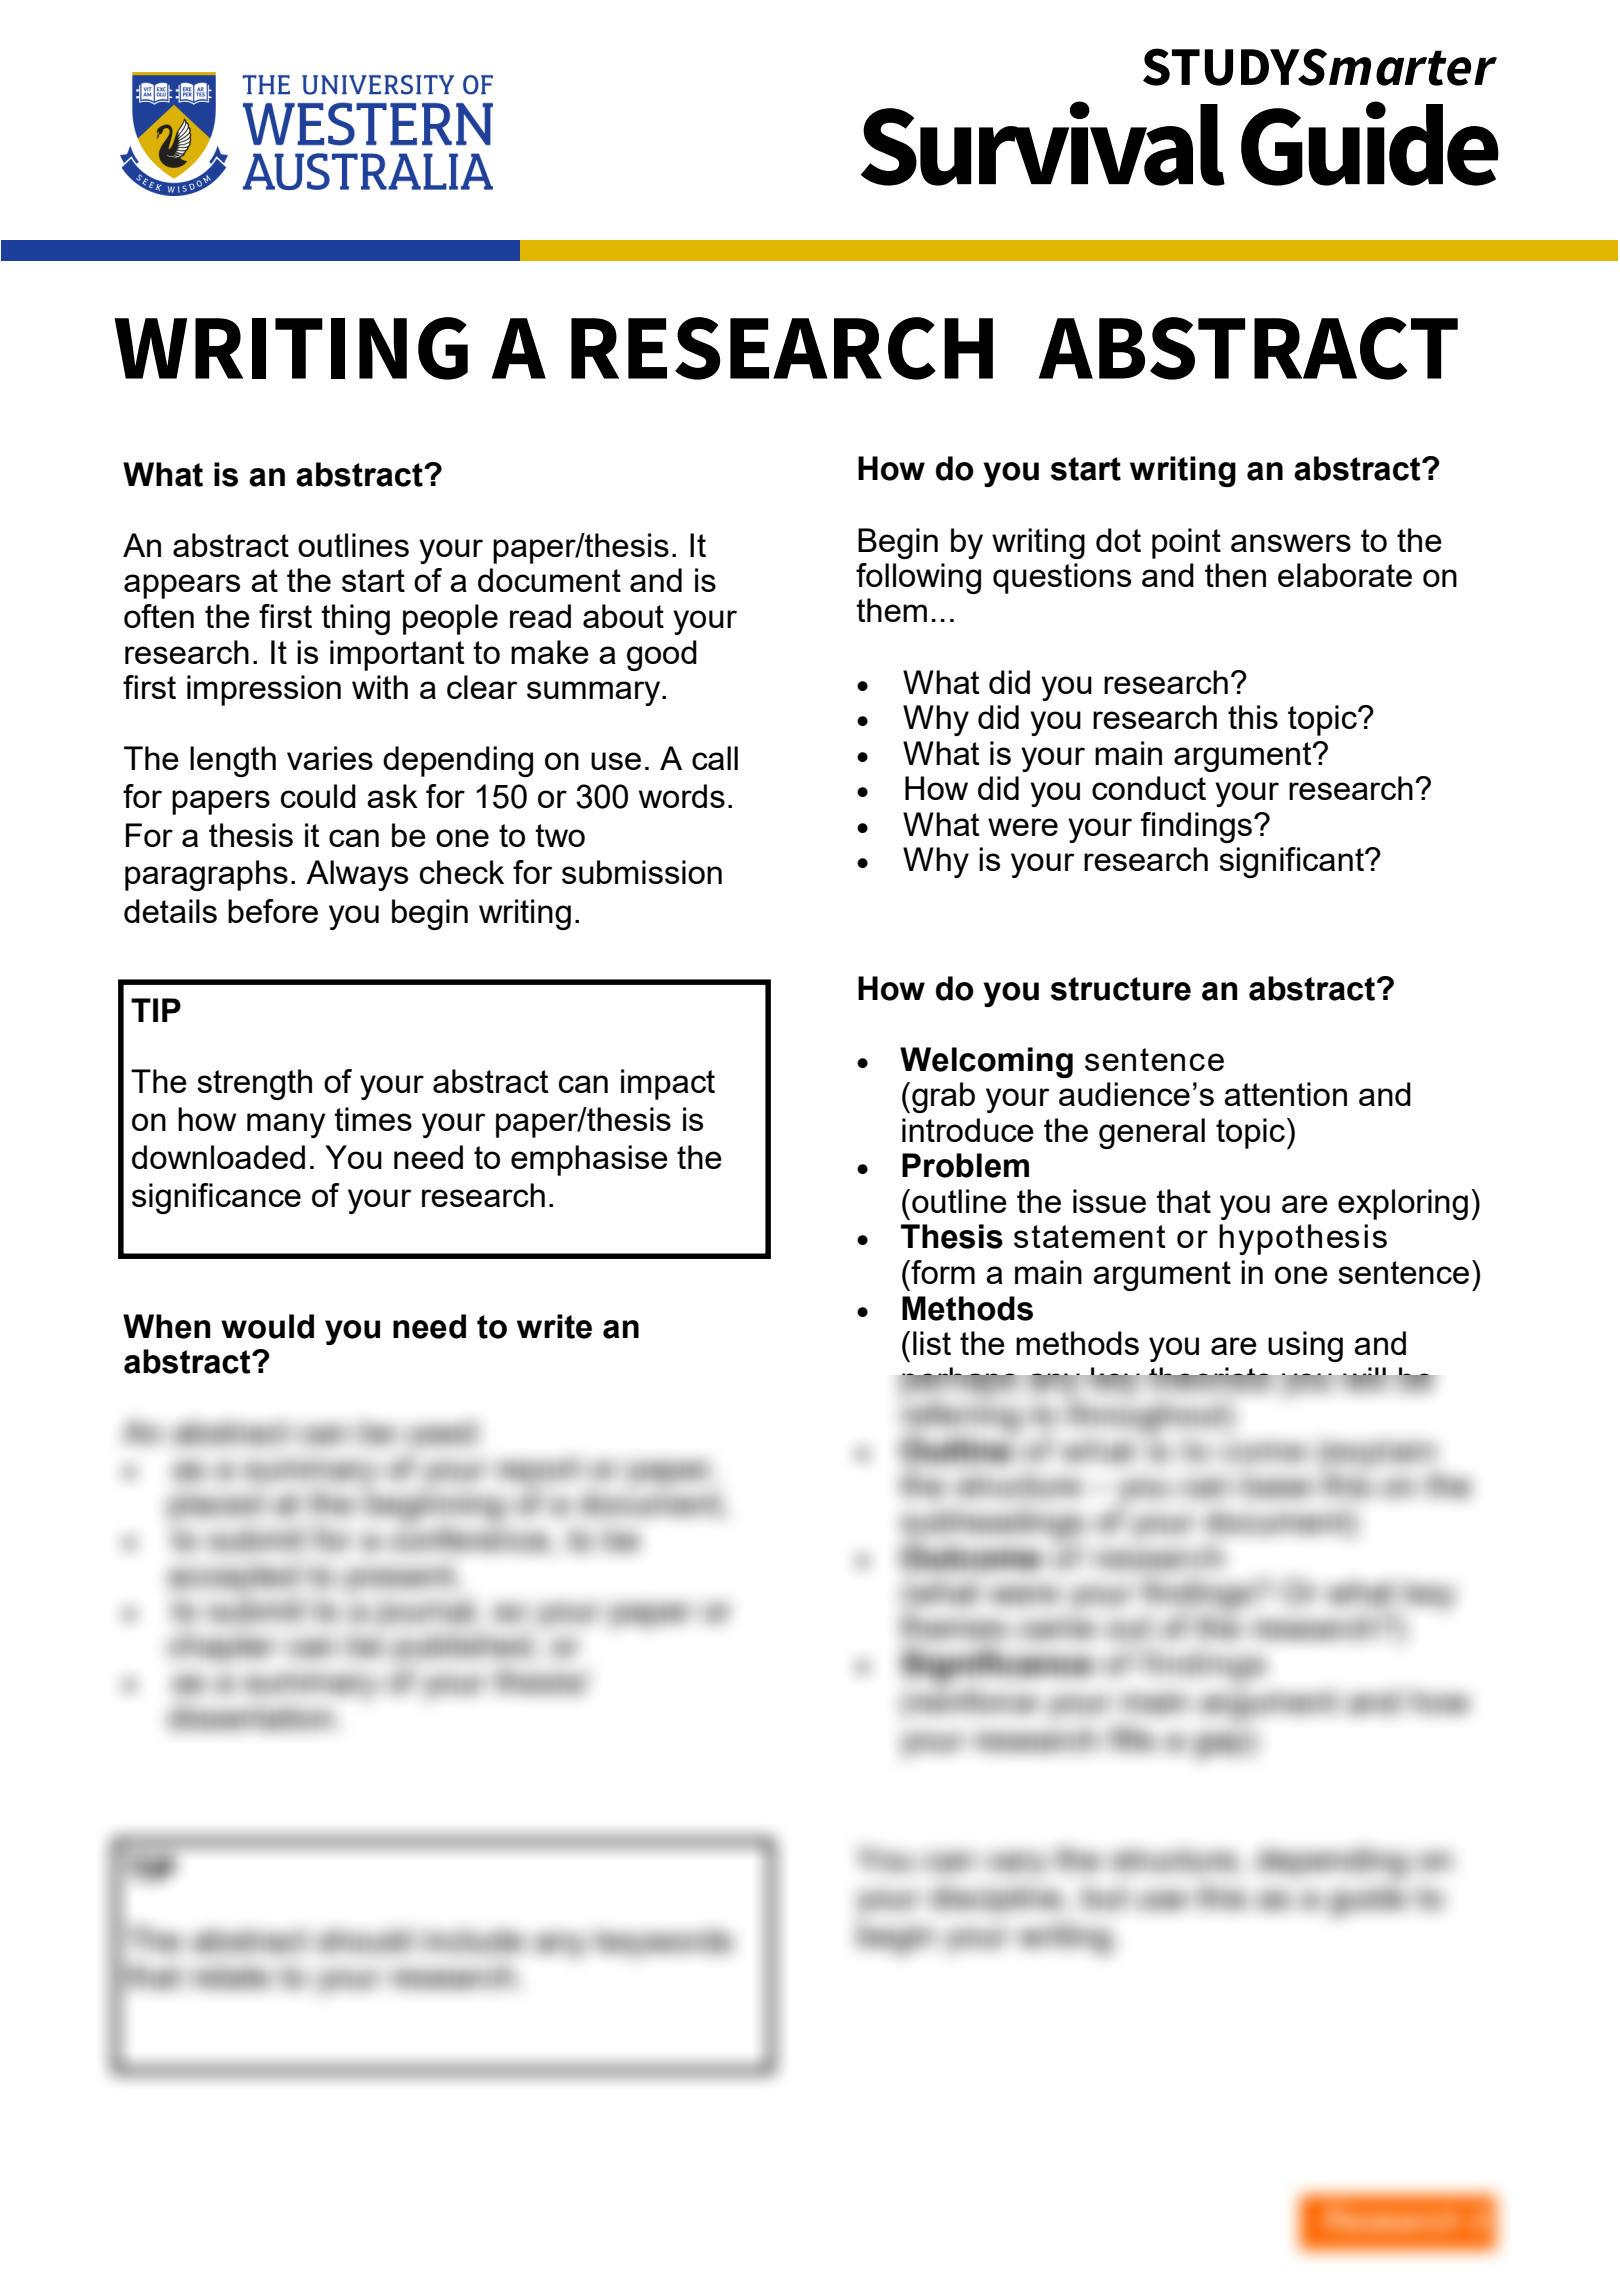 How To Start Writing An Abstract For A Research Paper